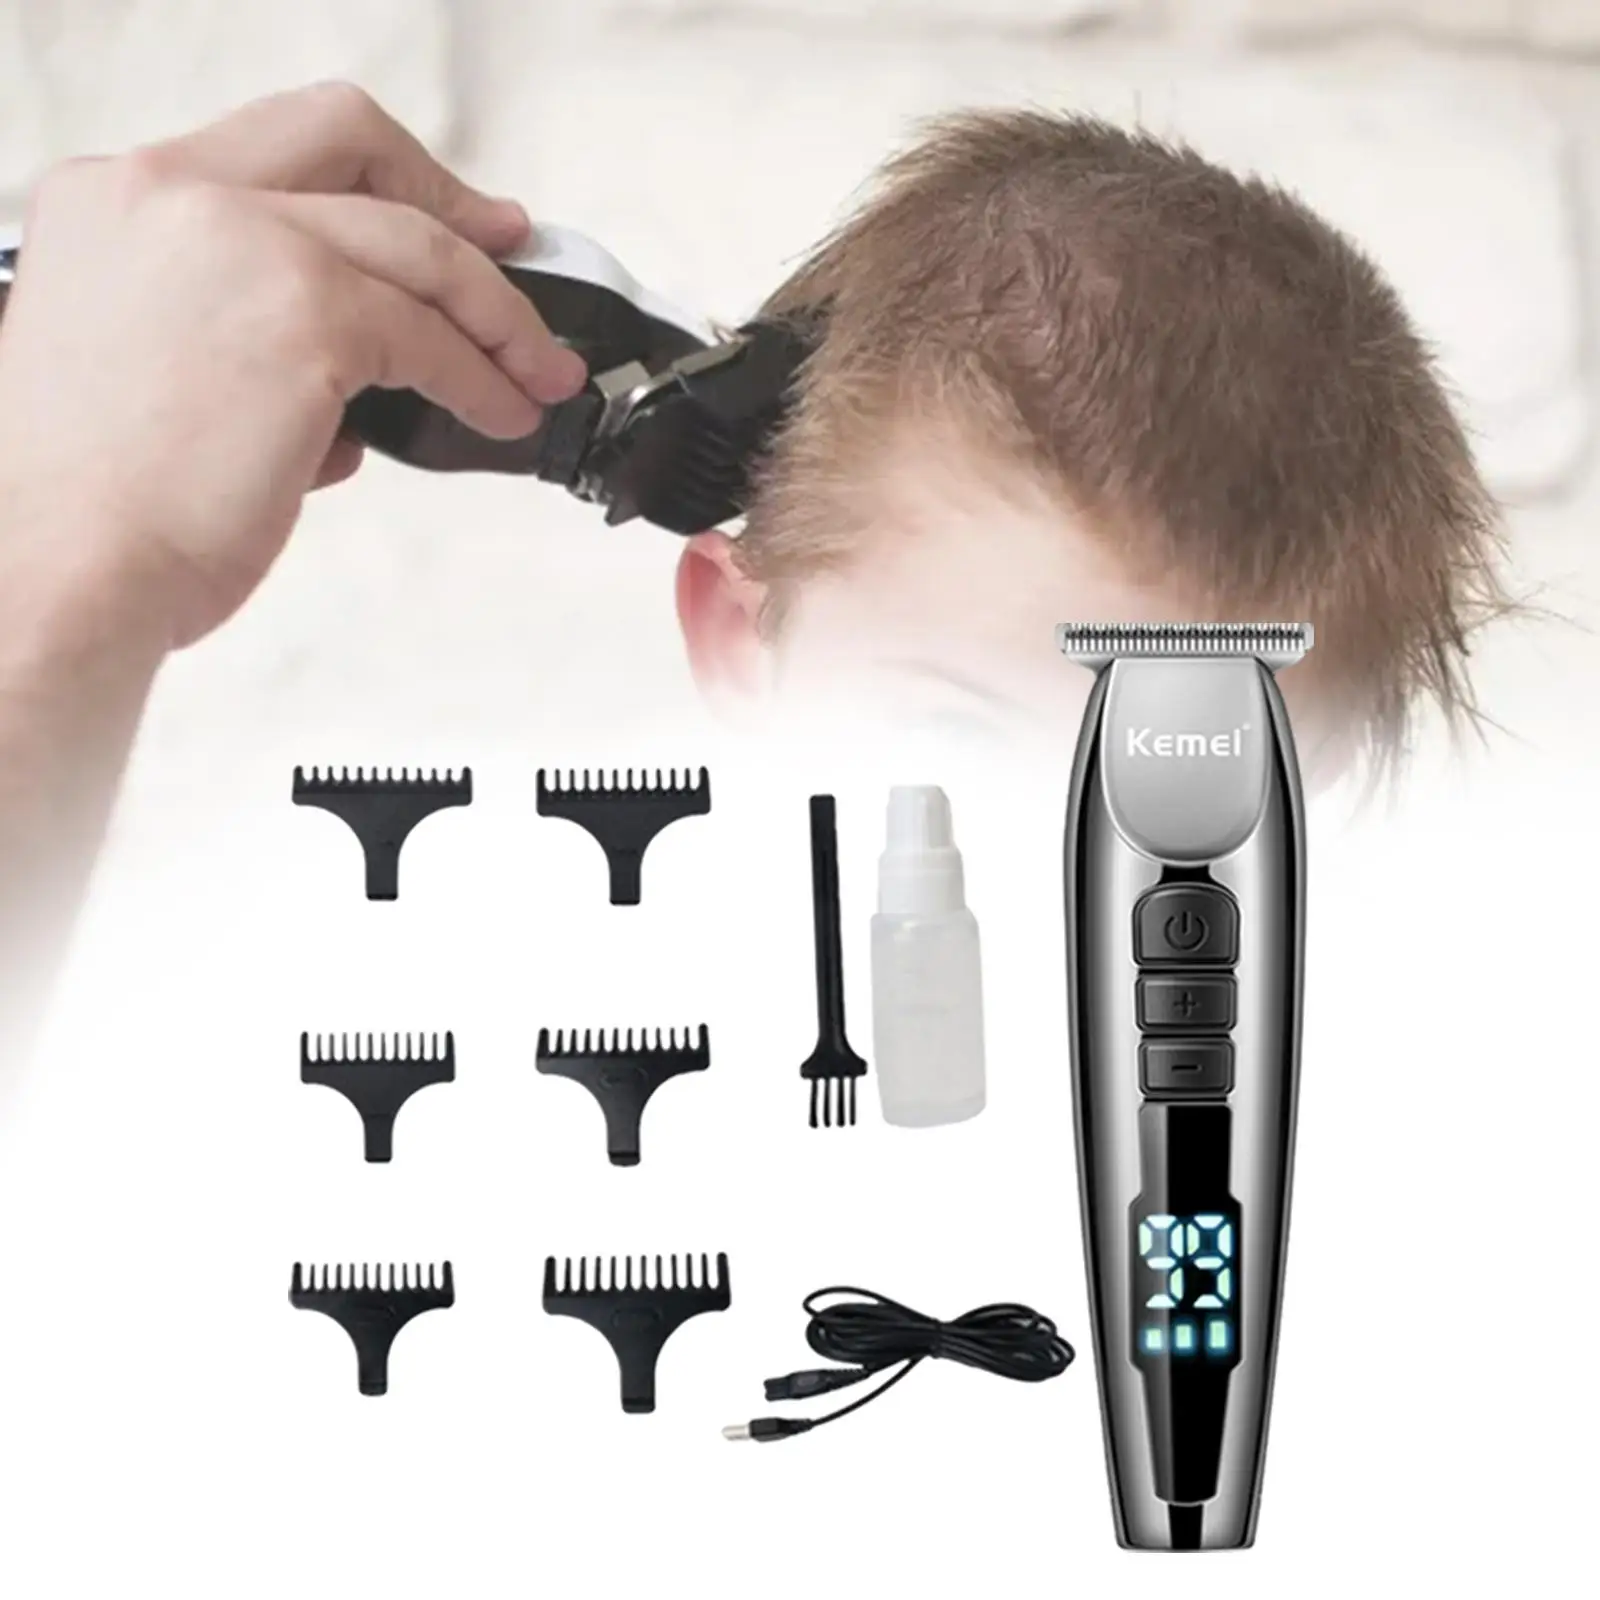 Powerful Clippers Supplies Low Noise Gifts LCD Digital Display Travel Home Mens Family Barber